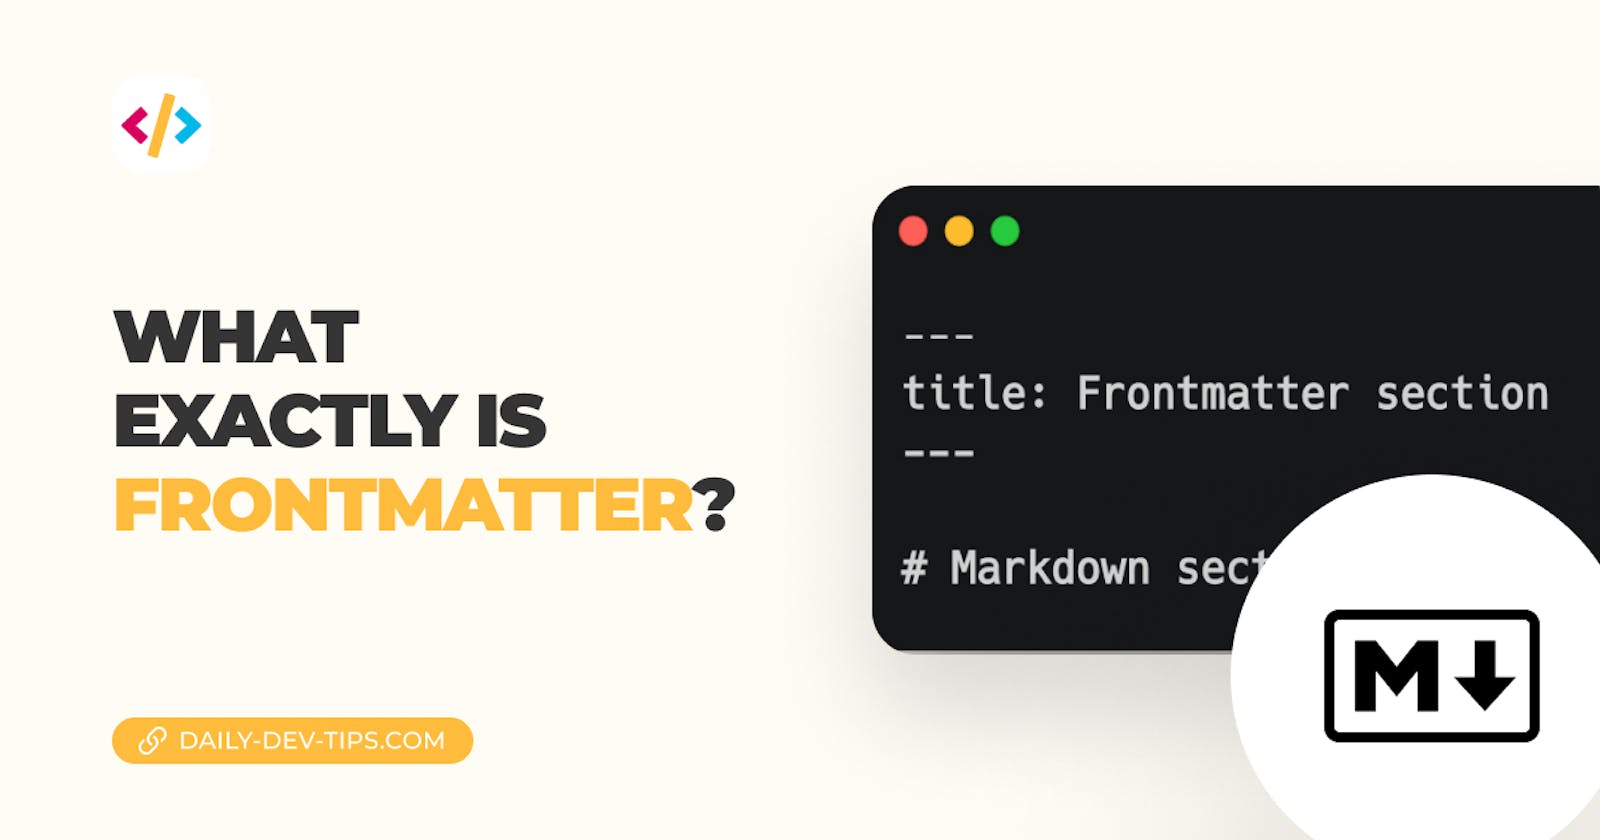 What exactly is Frontmatter?